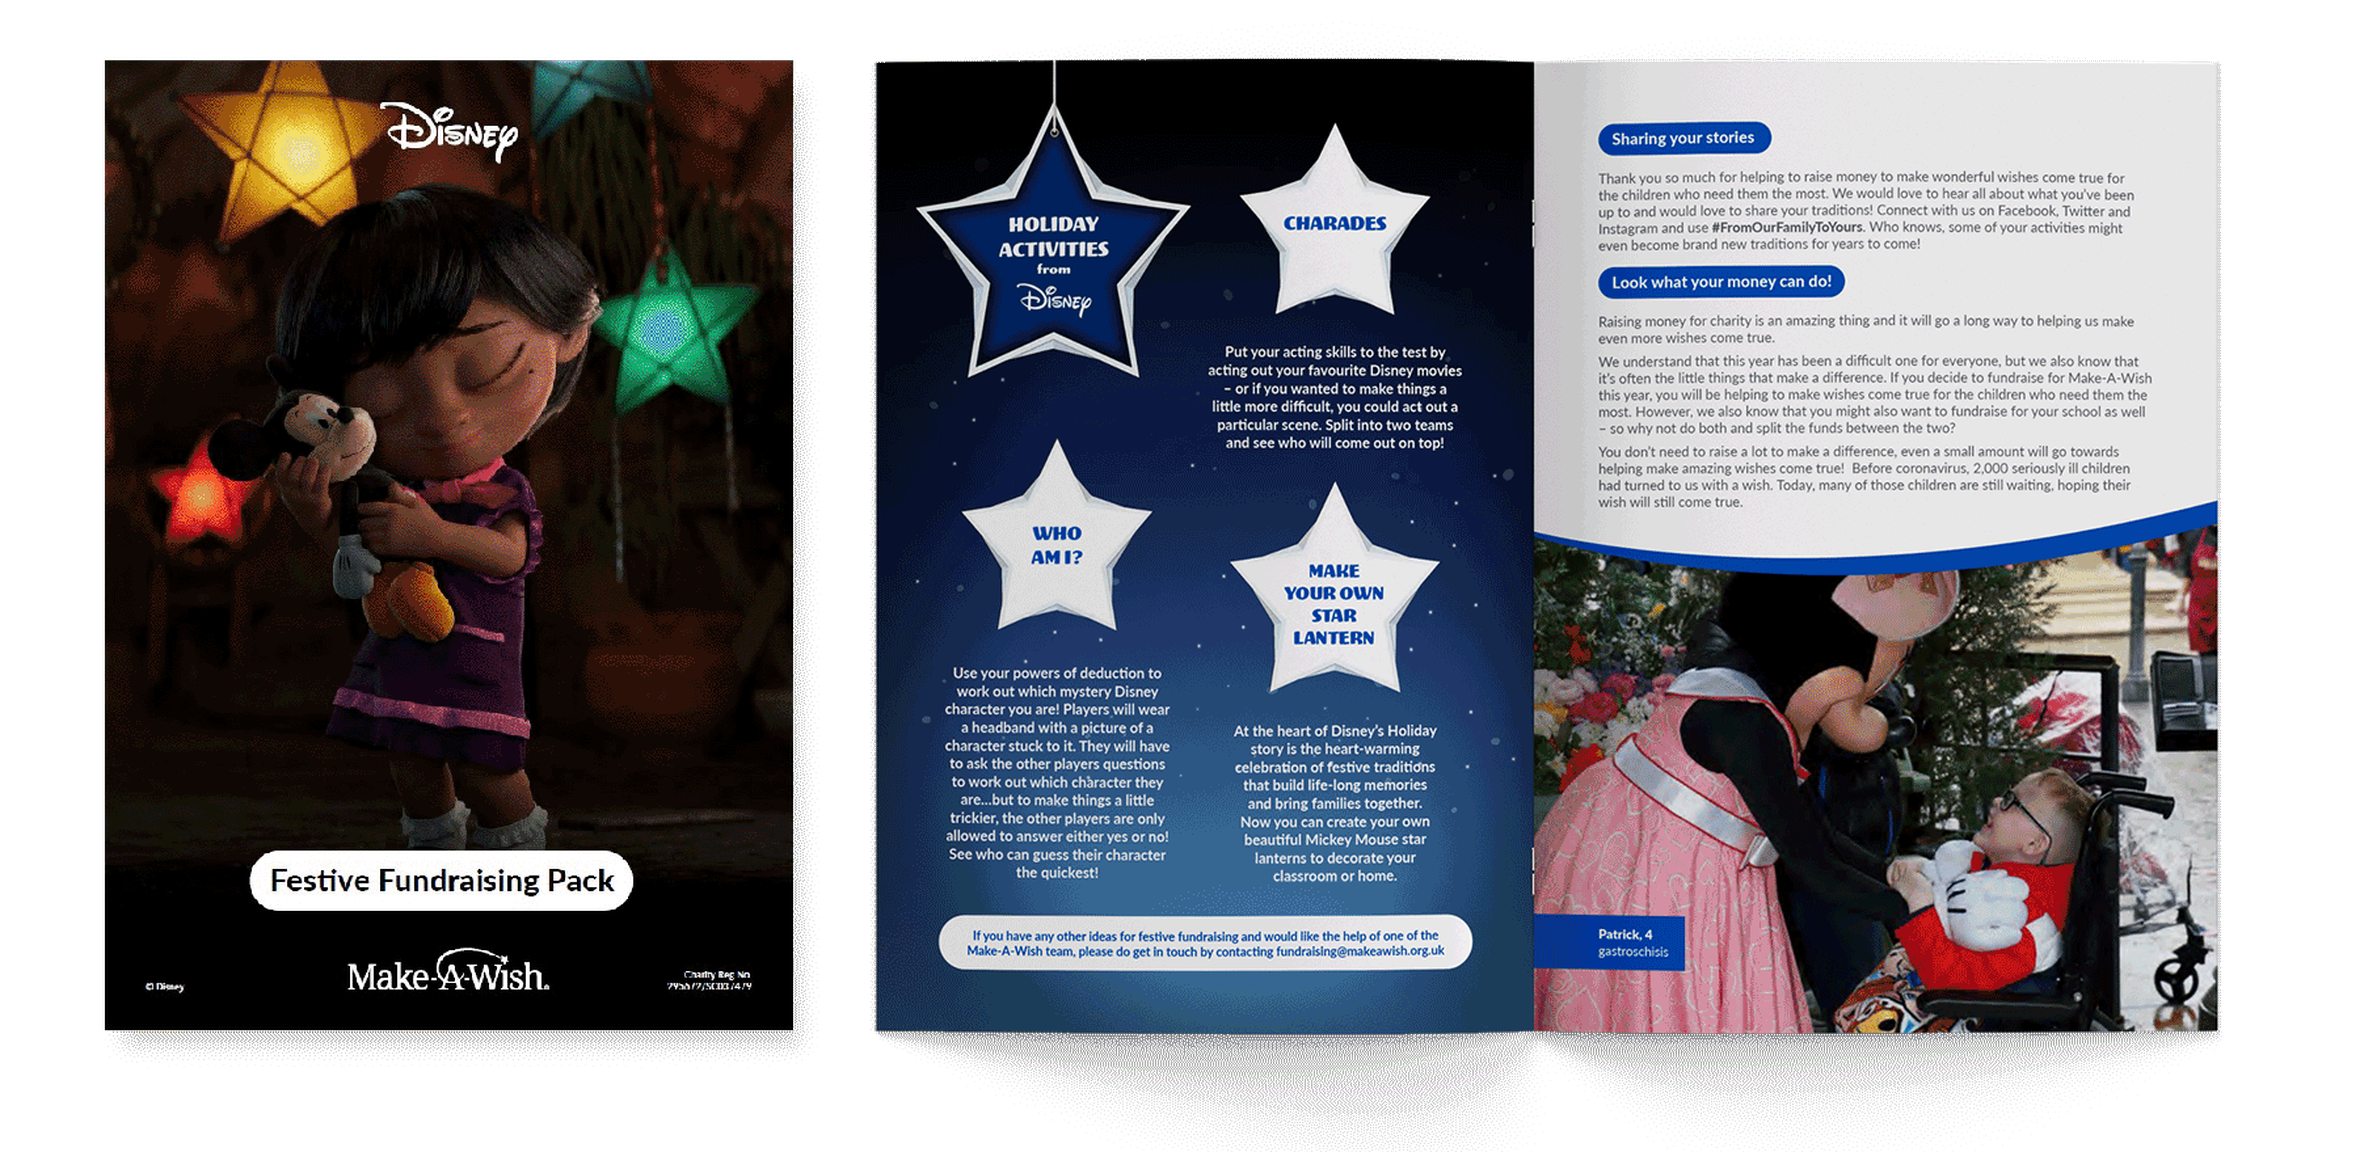 The Disney fundraising pack, which is available to download now.